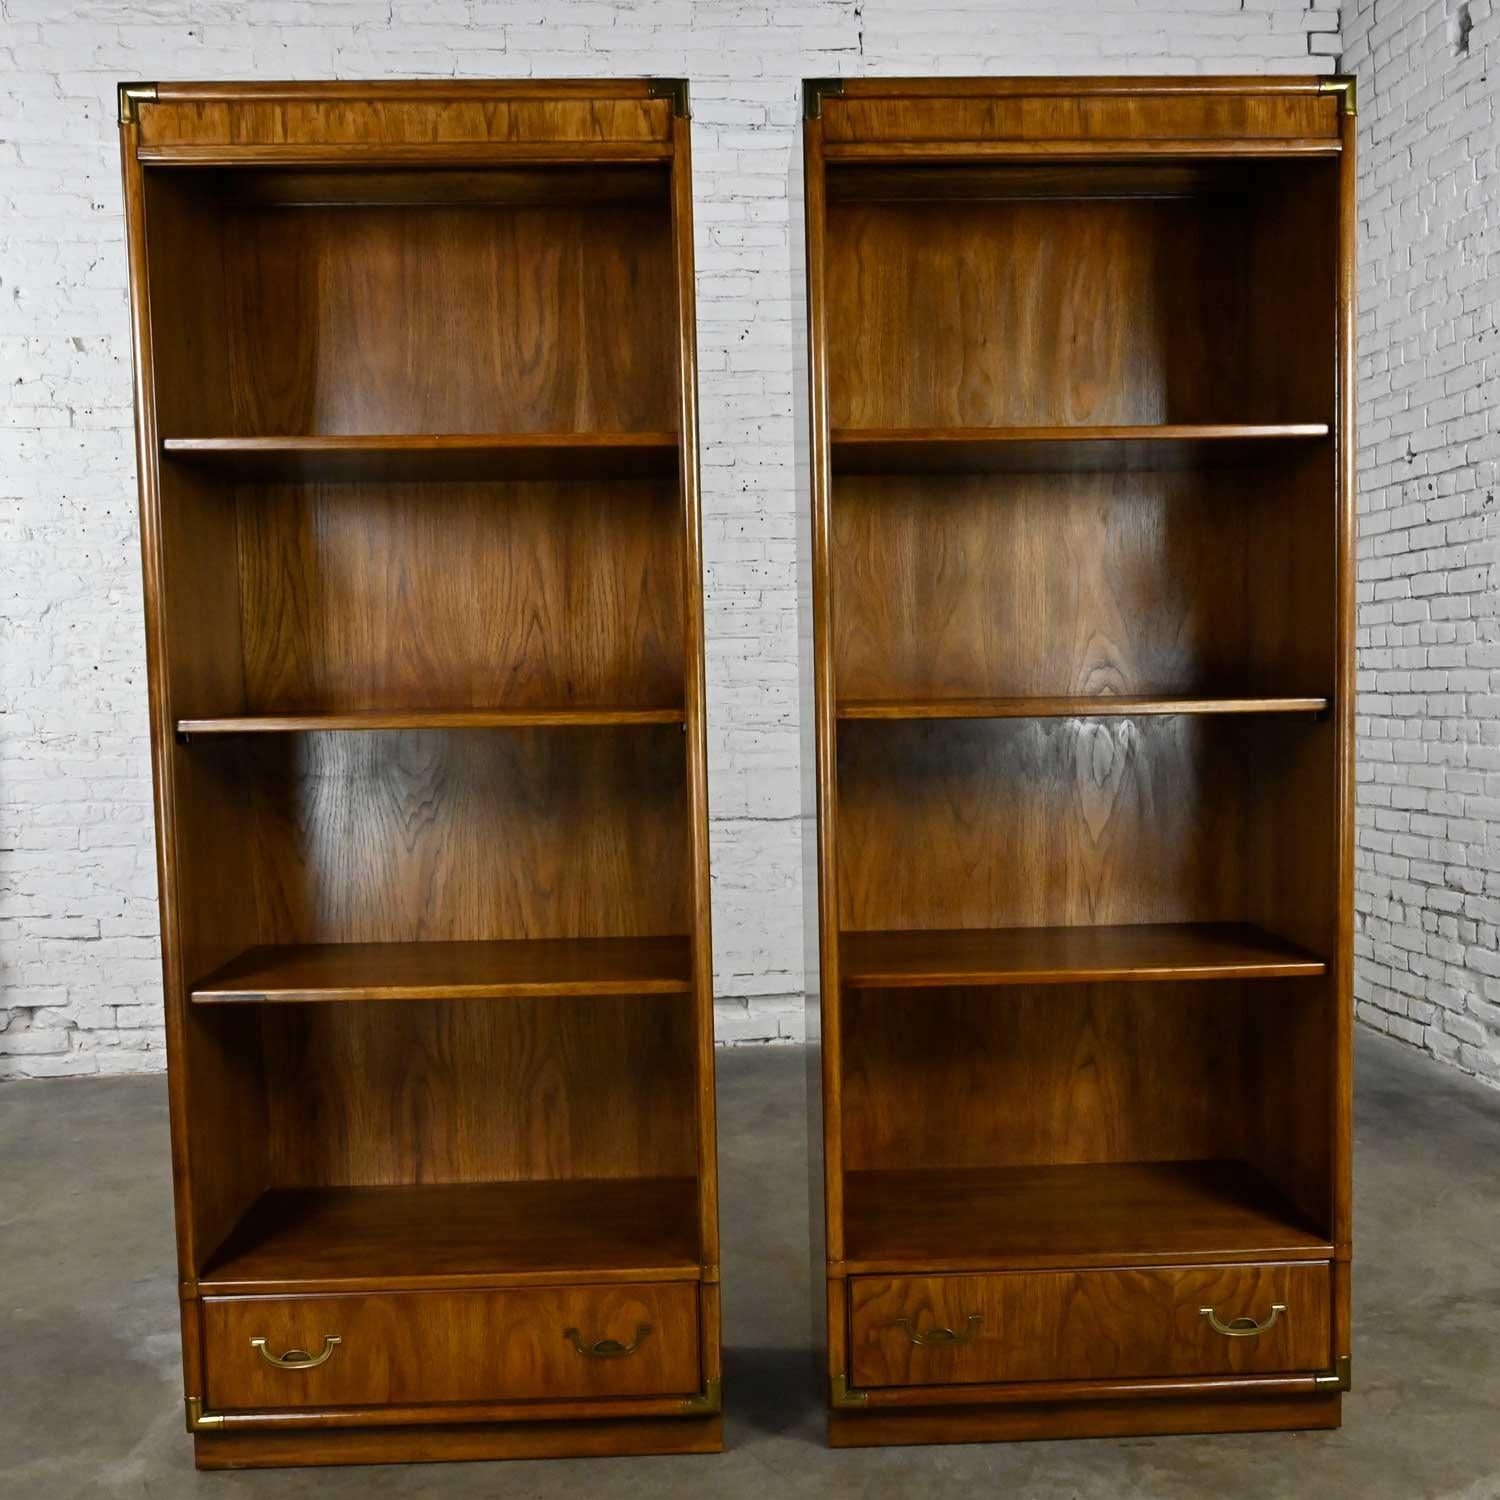 Awesome vintage Drexel Accolade II Collection Campaign style pair of bookcases or display cabinets with 3 shelves, lower drawer with brass plated hardware and corner details. Beautiful condition, keeping in mind that these are vintage and not new so